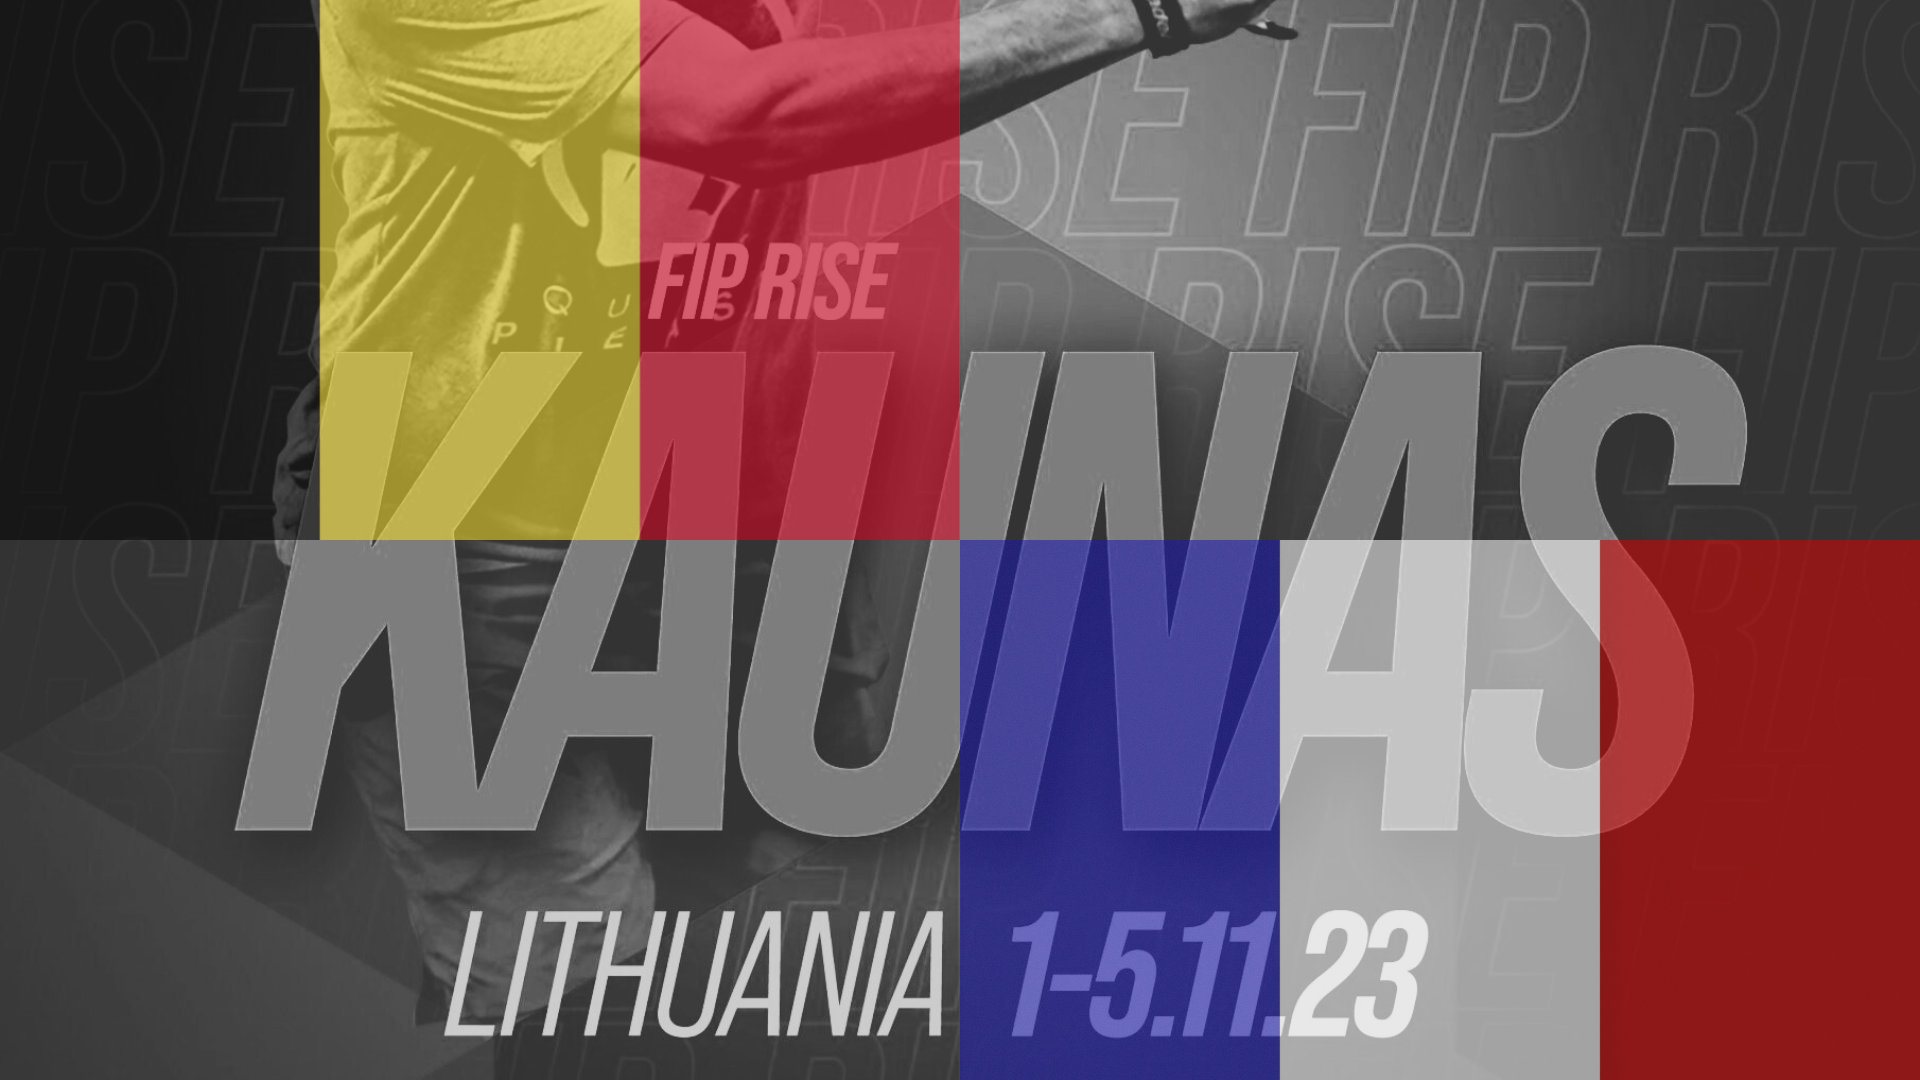 FIP Rise Kaunas: a Franco-Belgian duo and a 100% tricolor pair taking on Lithuania